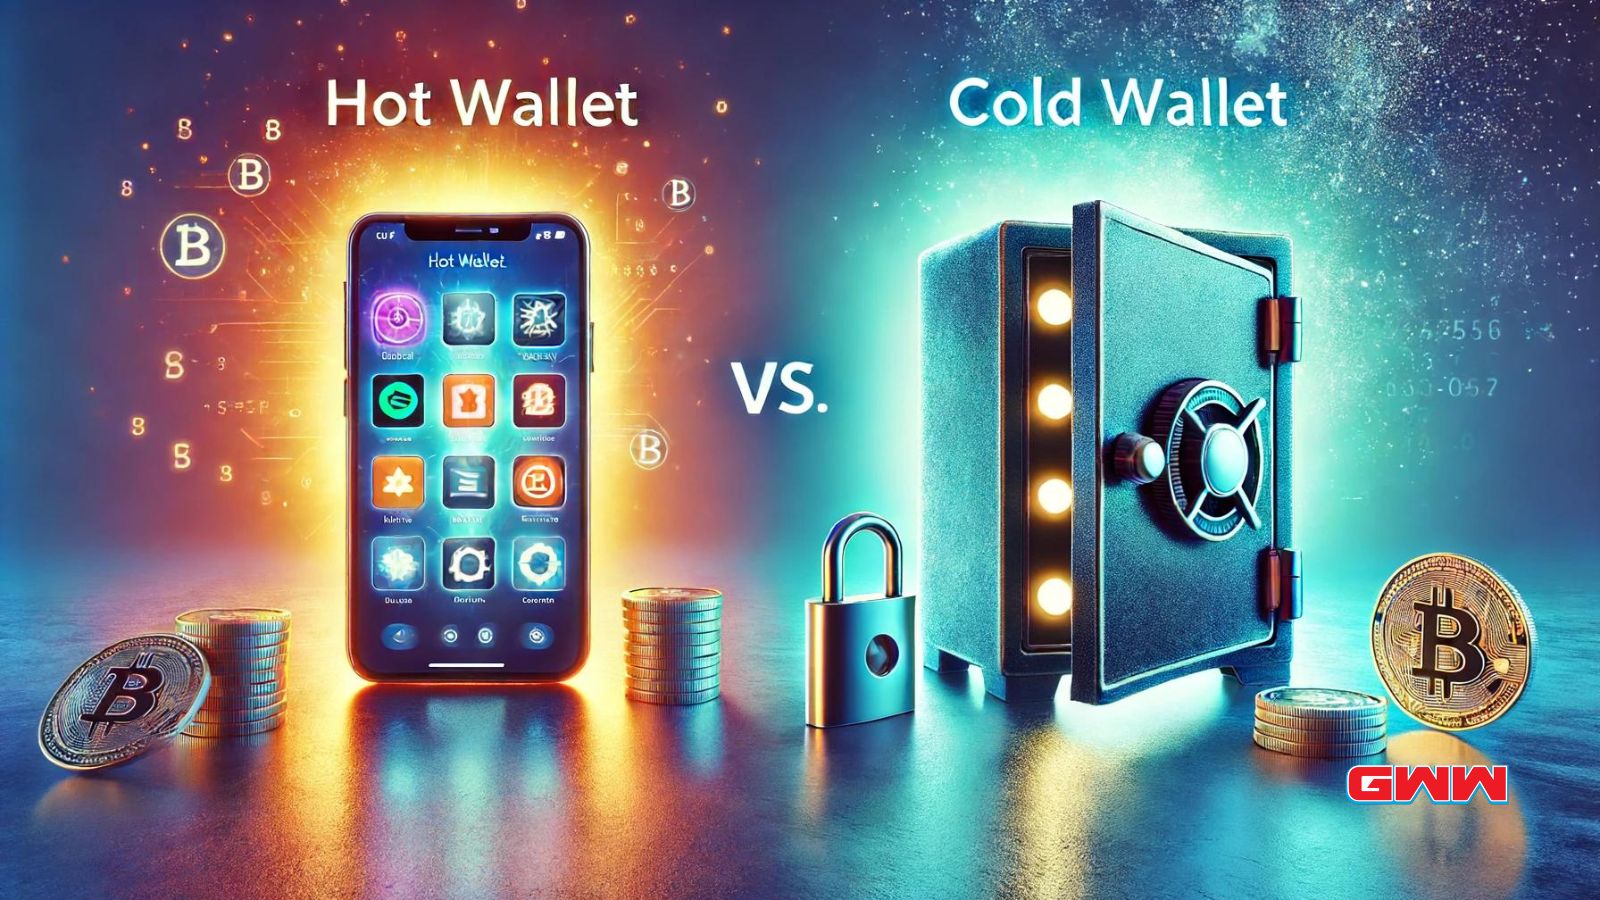 A scene depicting a comparison between a hot wallet and a cold wallet.